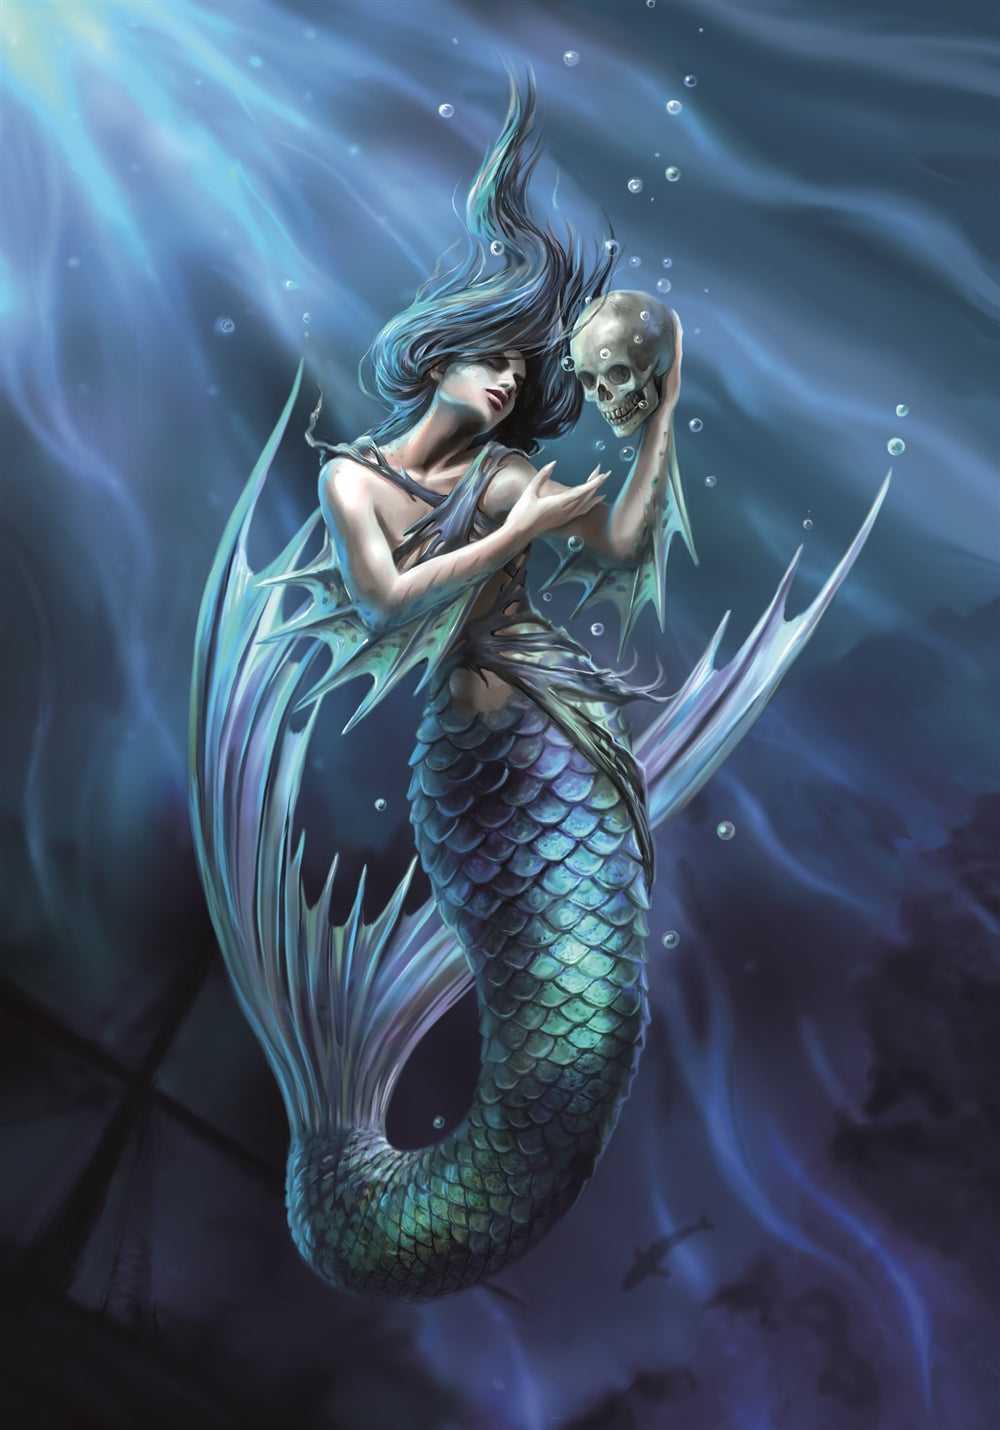 Sailor's Ruin by Anne Stokes, Greeting Card